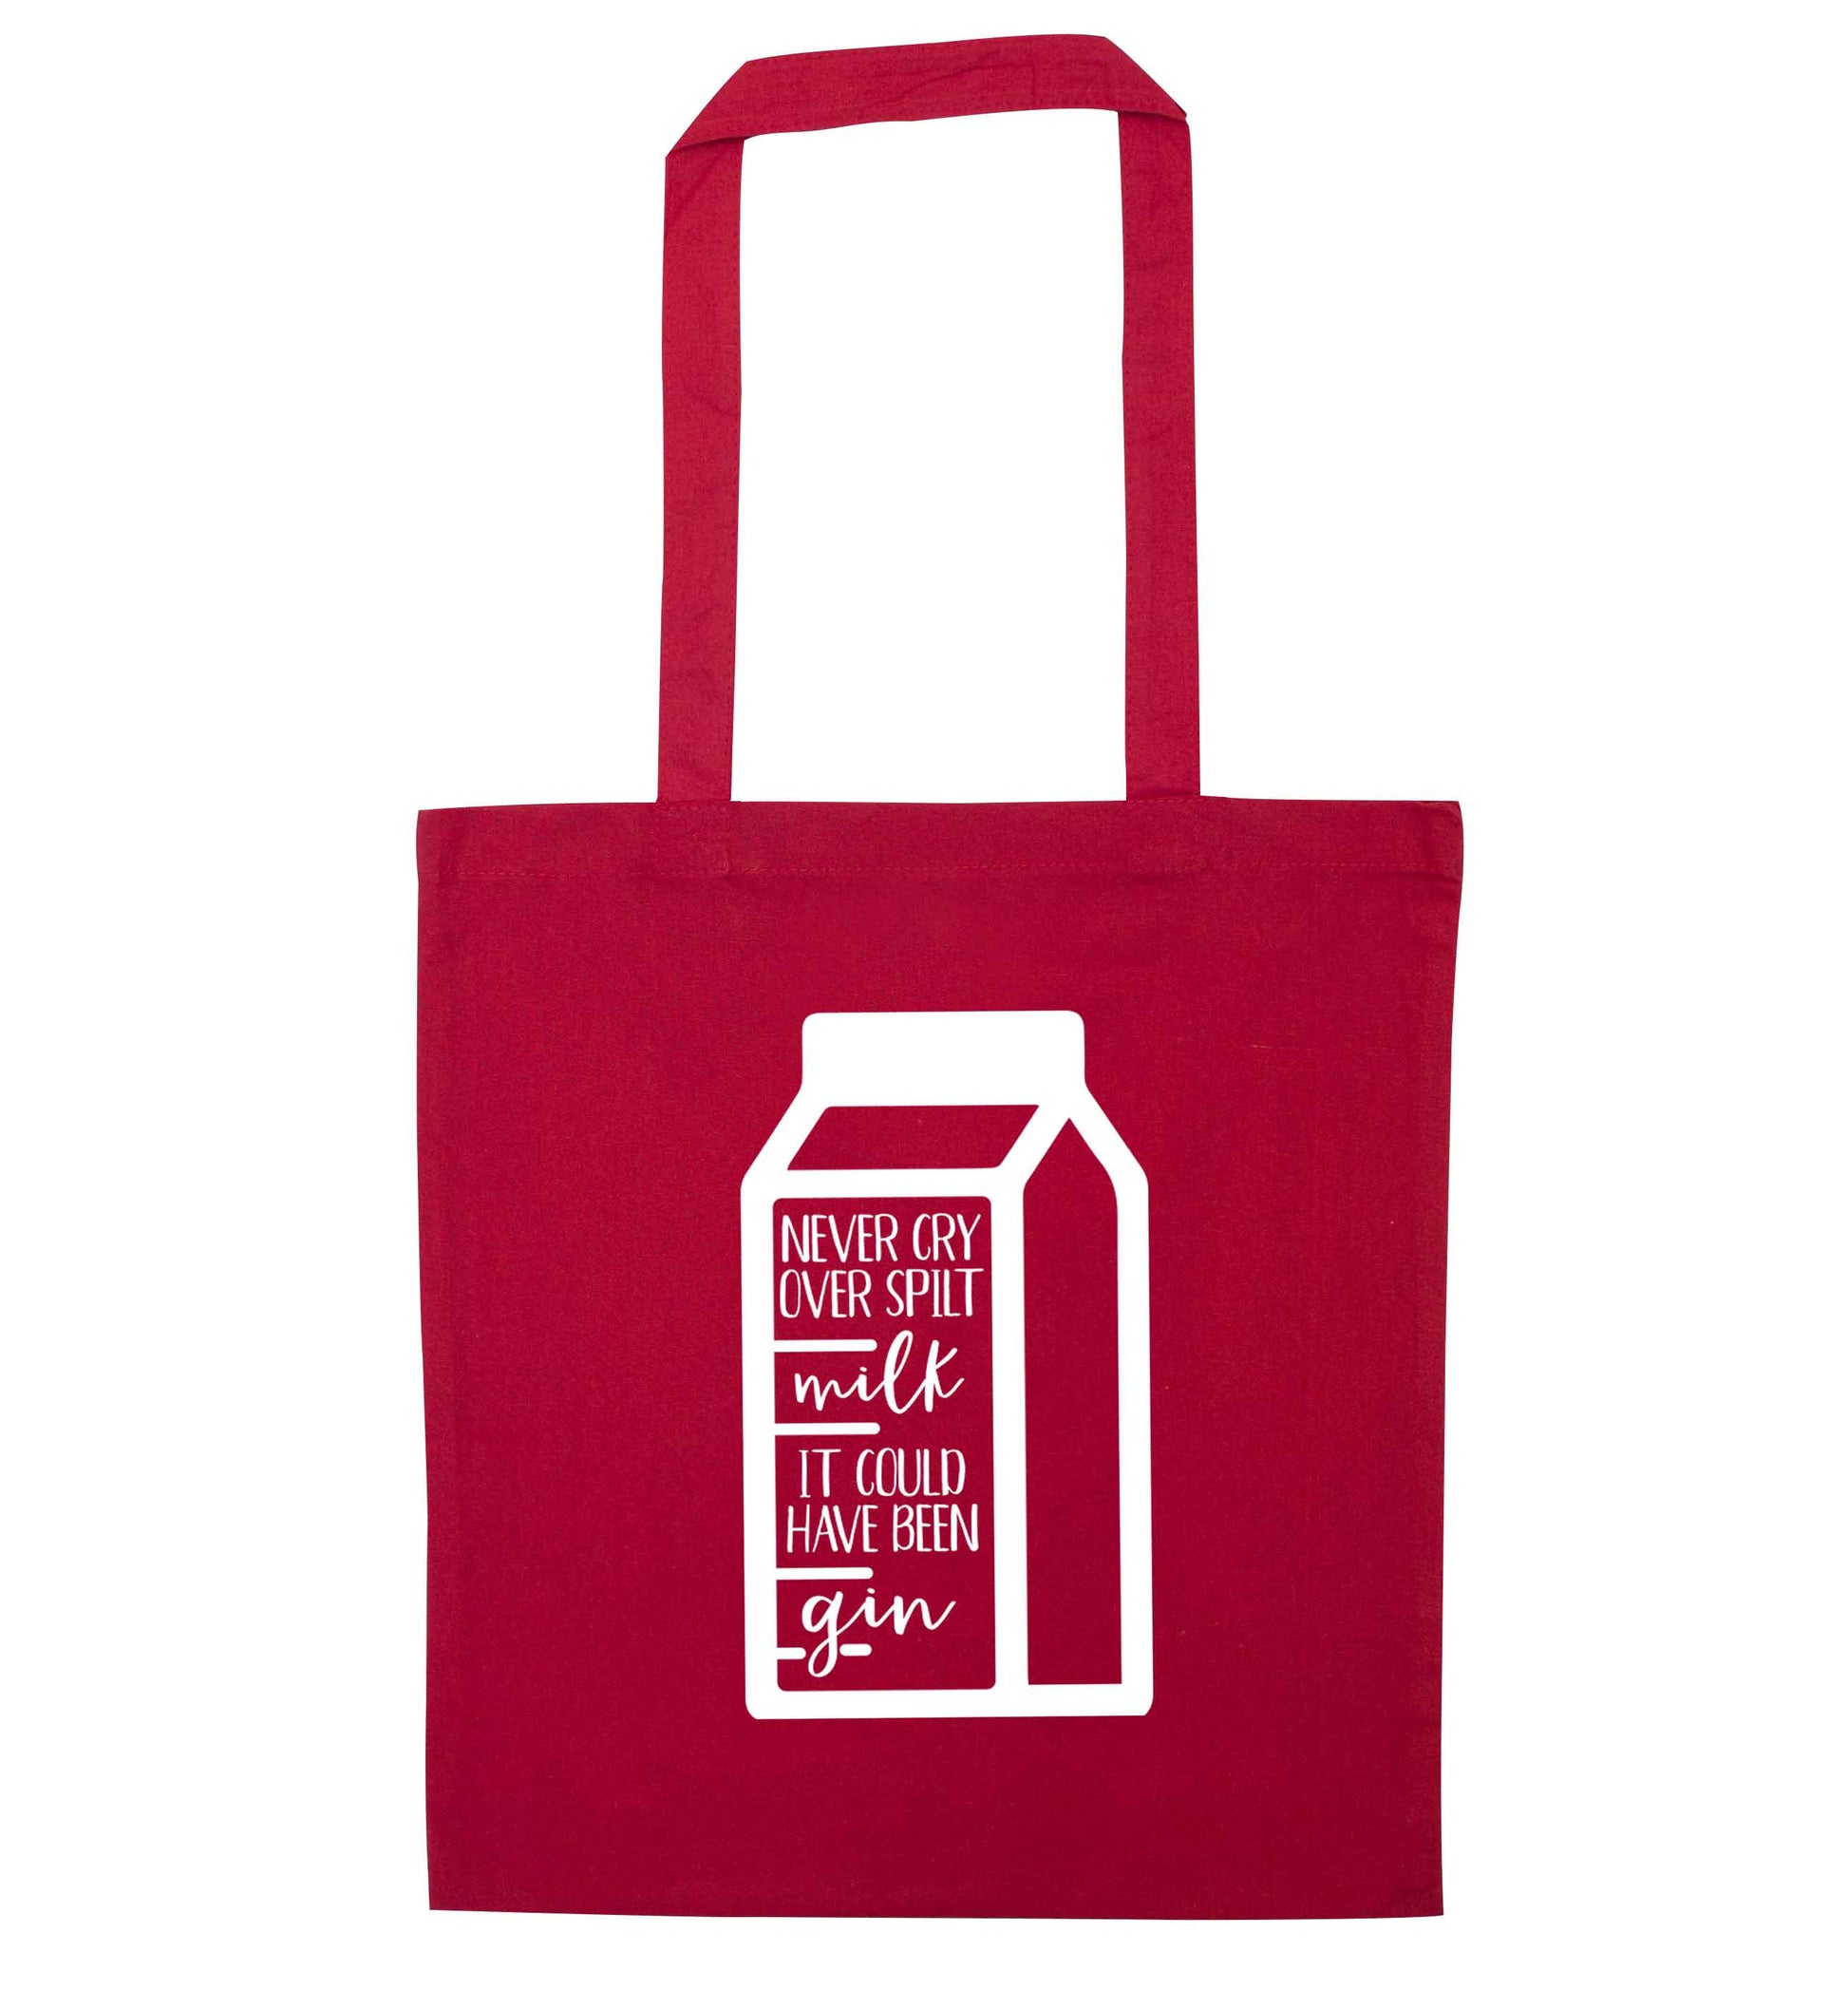 Never cry over spilt milk, it could have been gin red tote bag